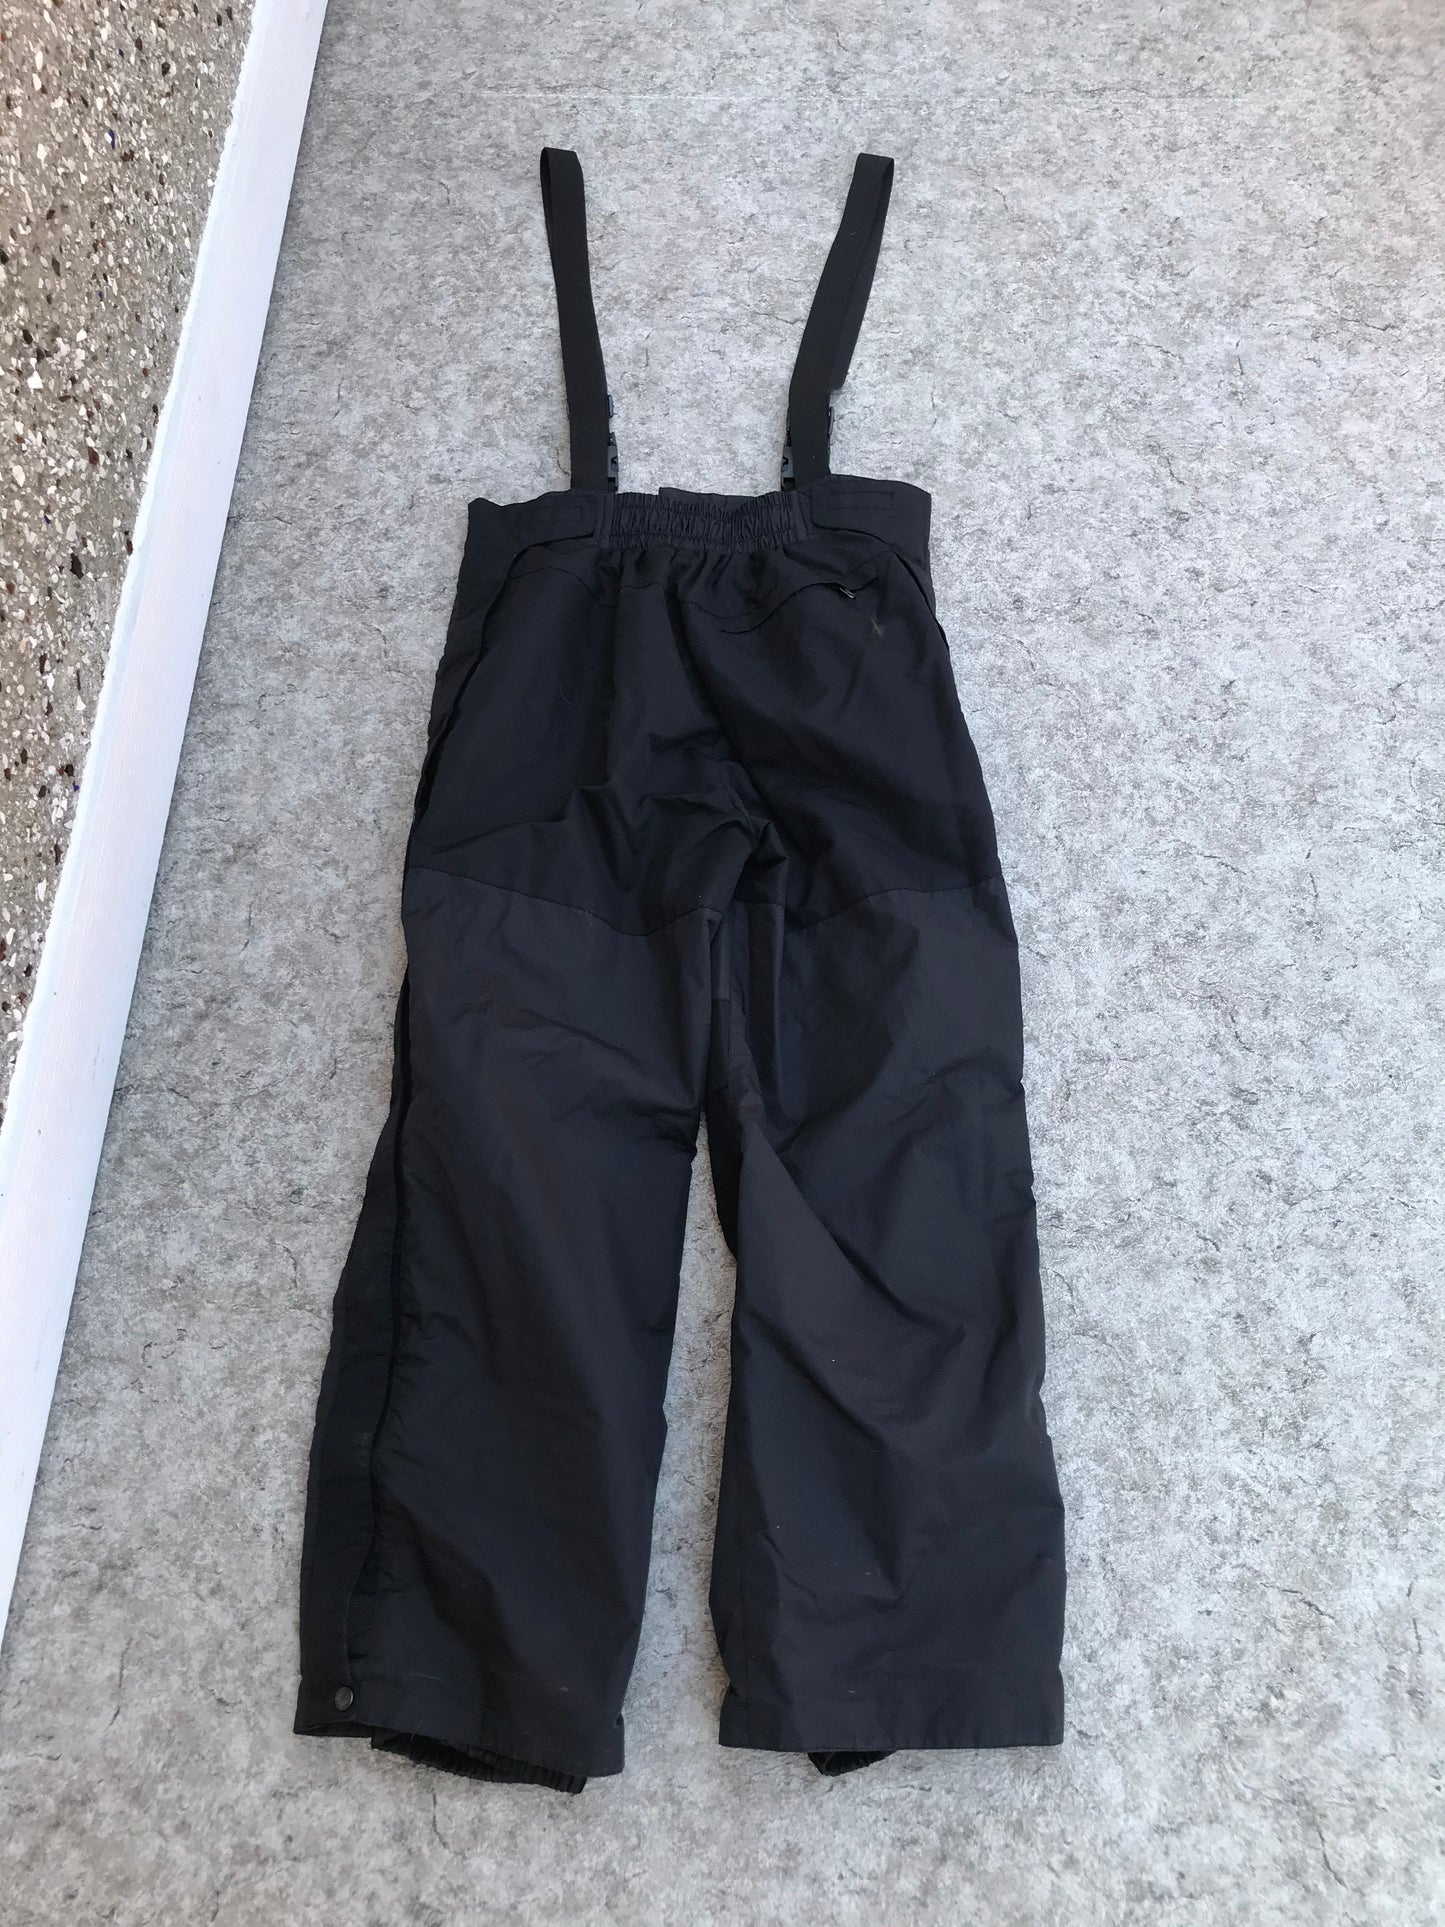 Snow Pants Men's Size XX Large The North Face Gore-Tex Black Snowboard With Straps 32 inch Leg Full Zippers Up Both Legs Excellent